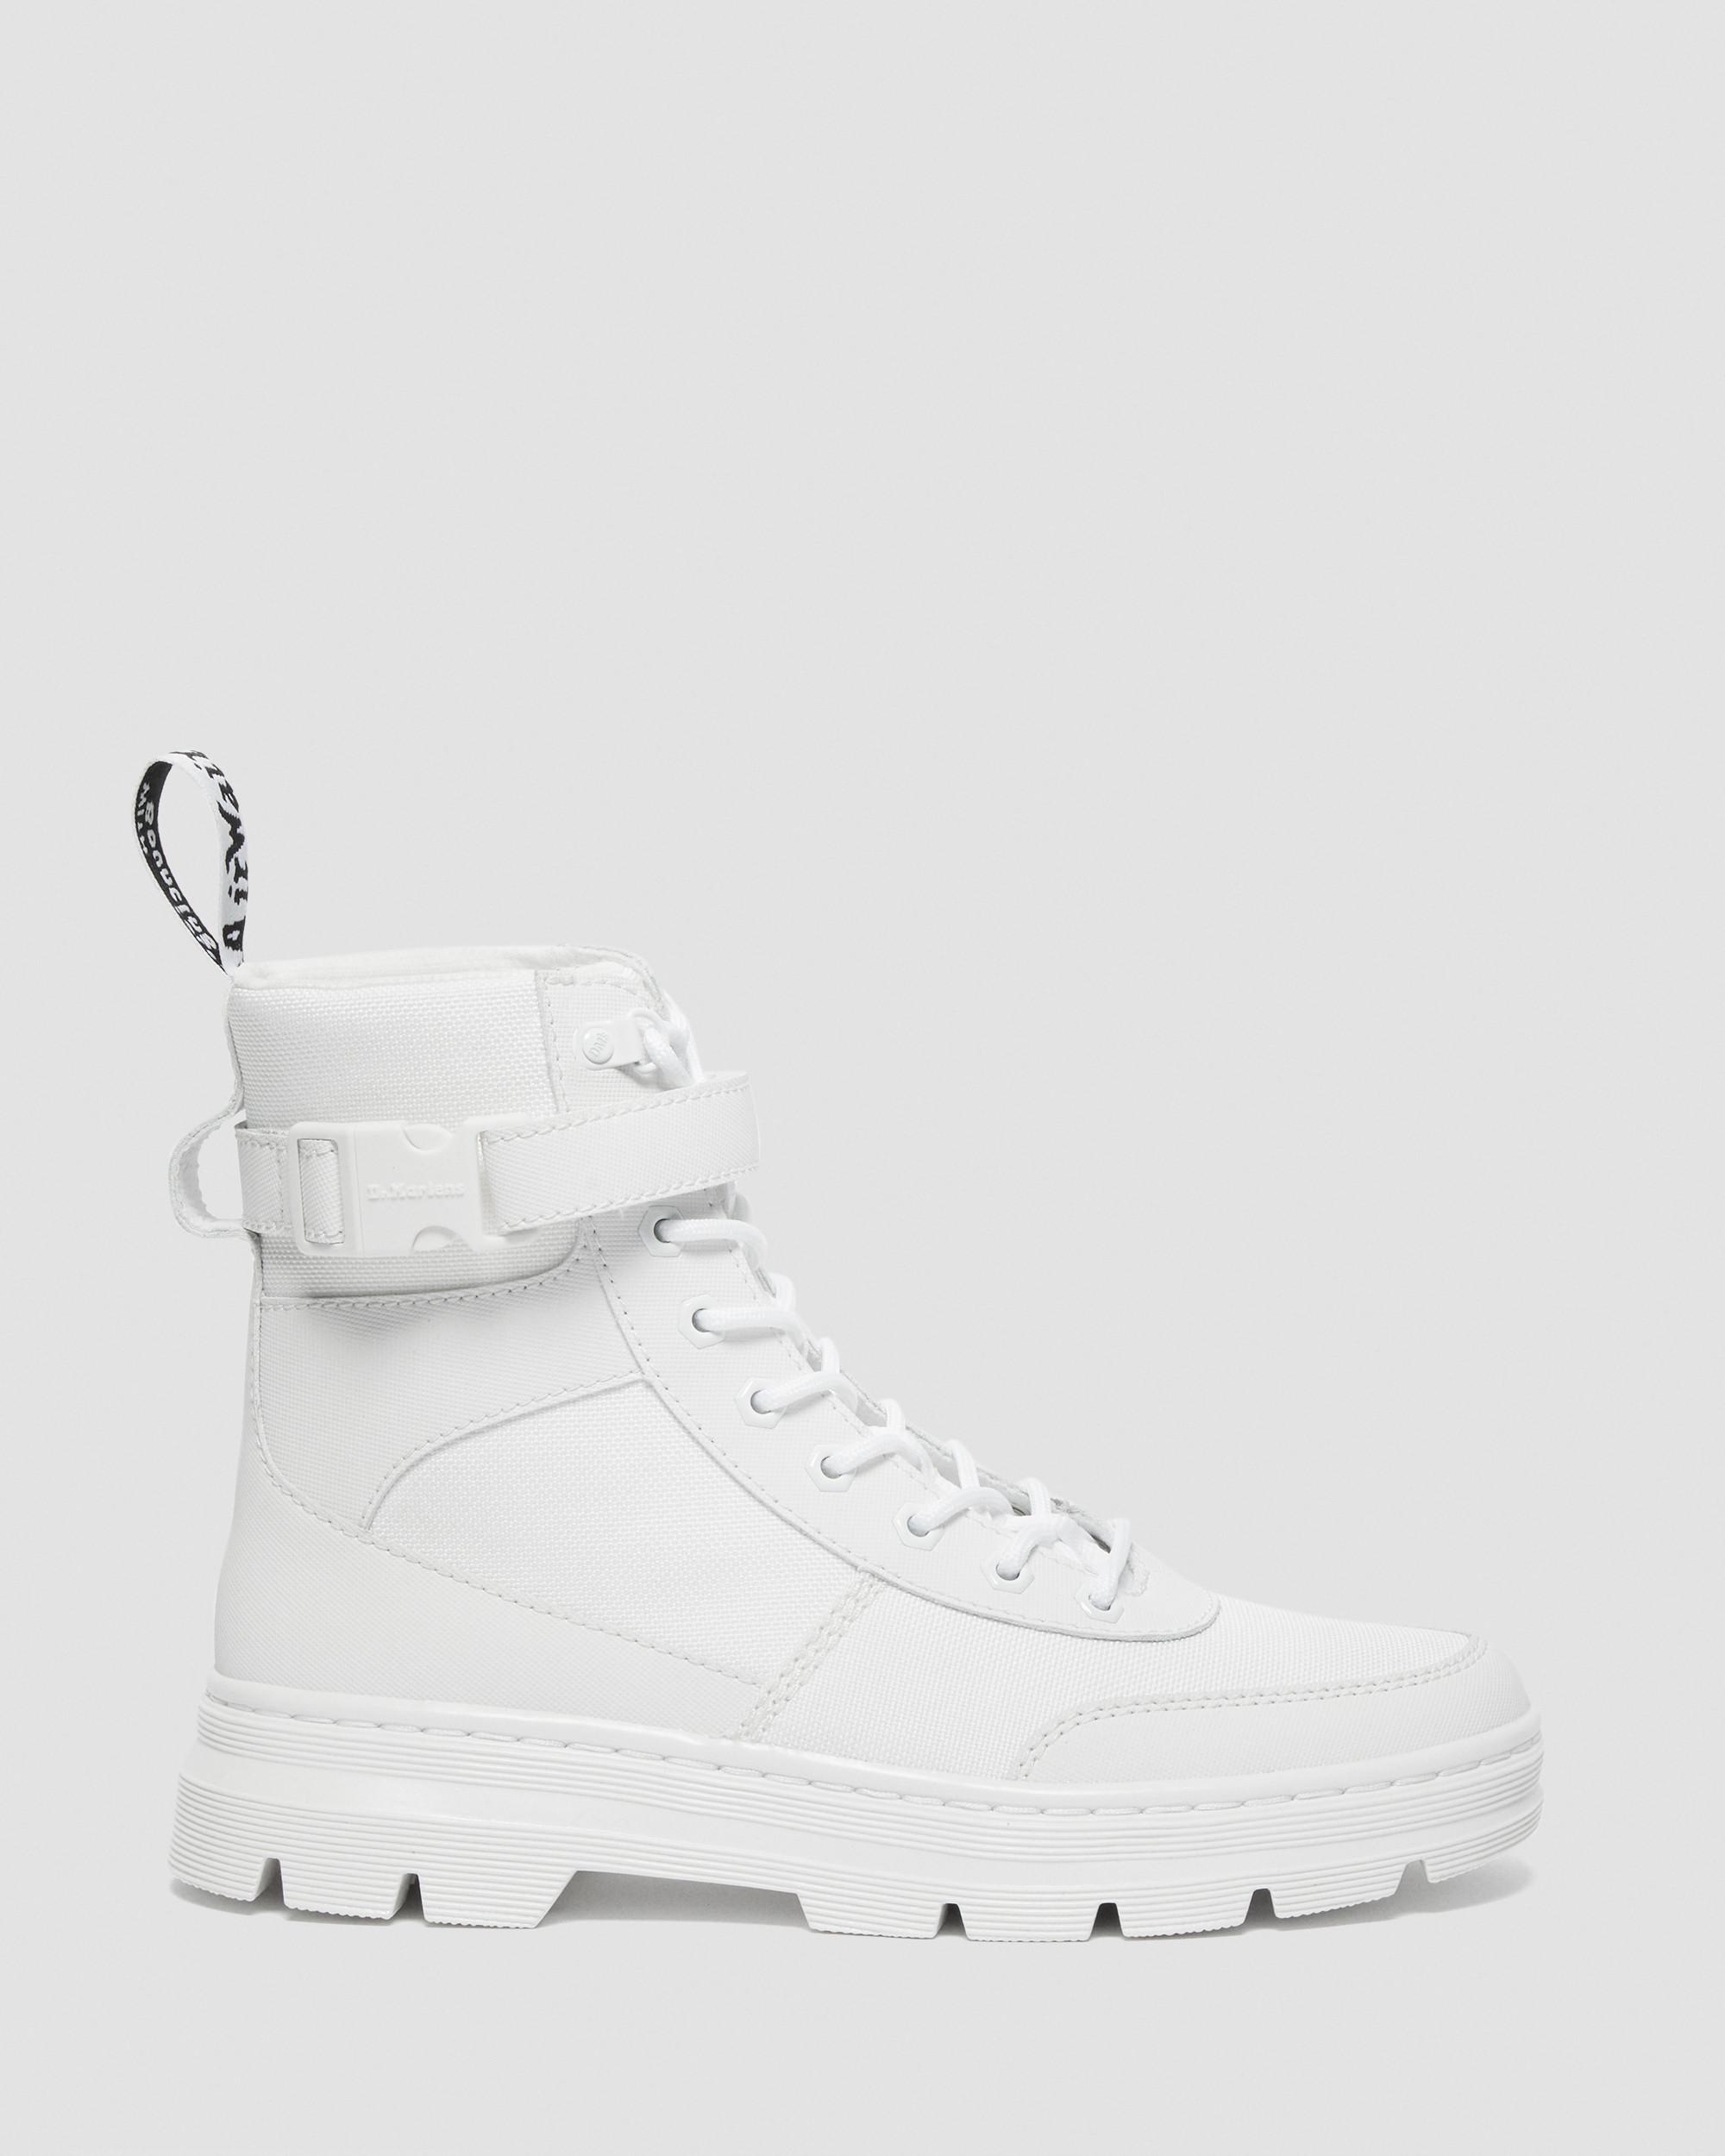 Combs Tech Utility Boots in White | Dr. Martens